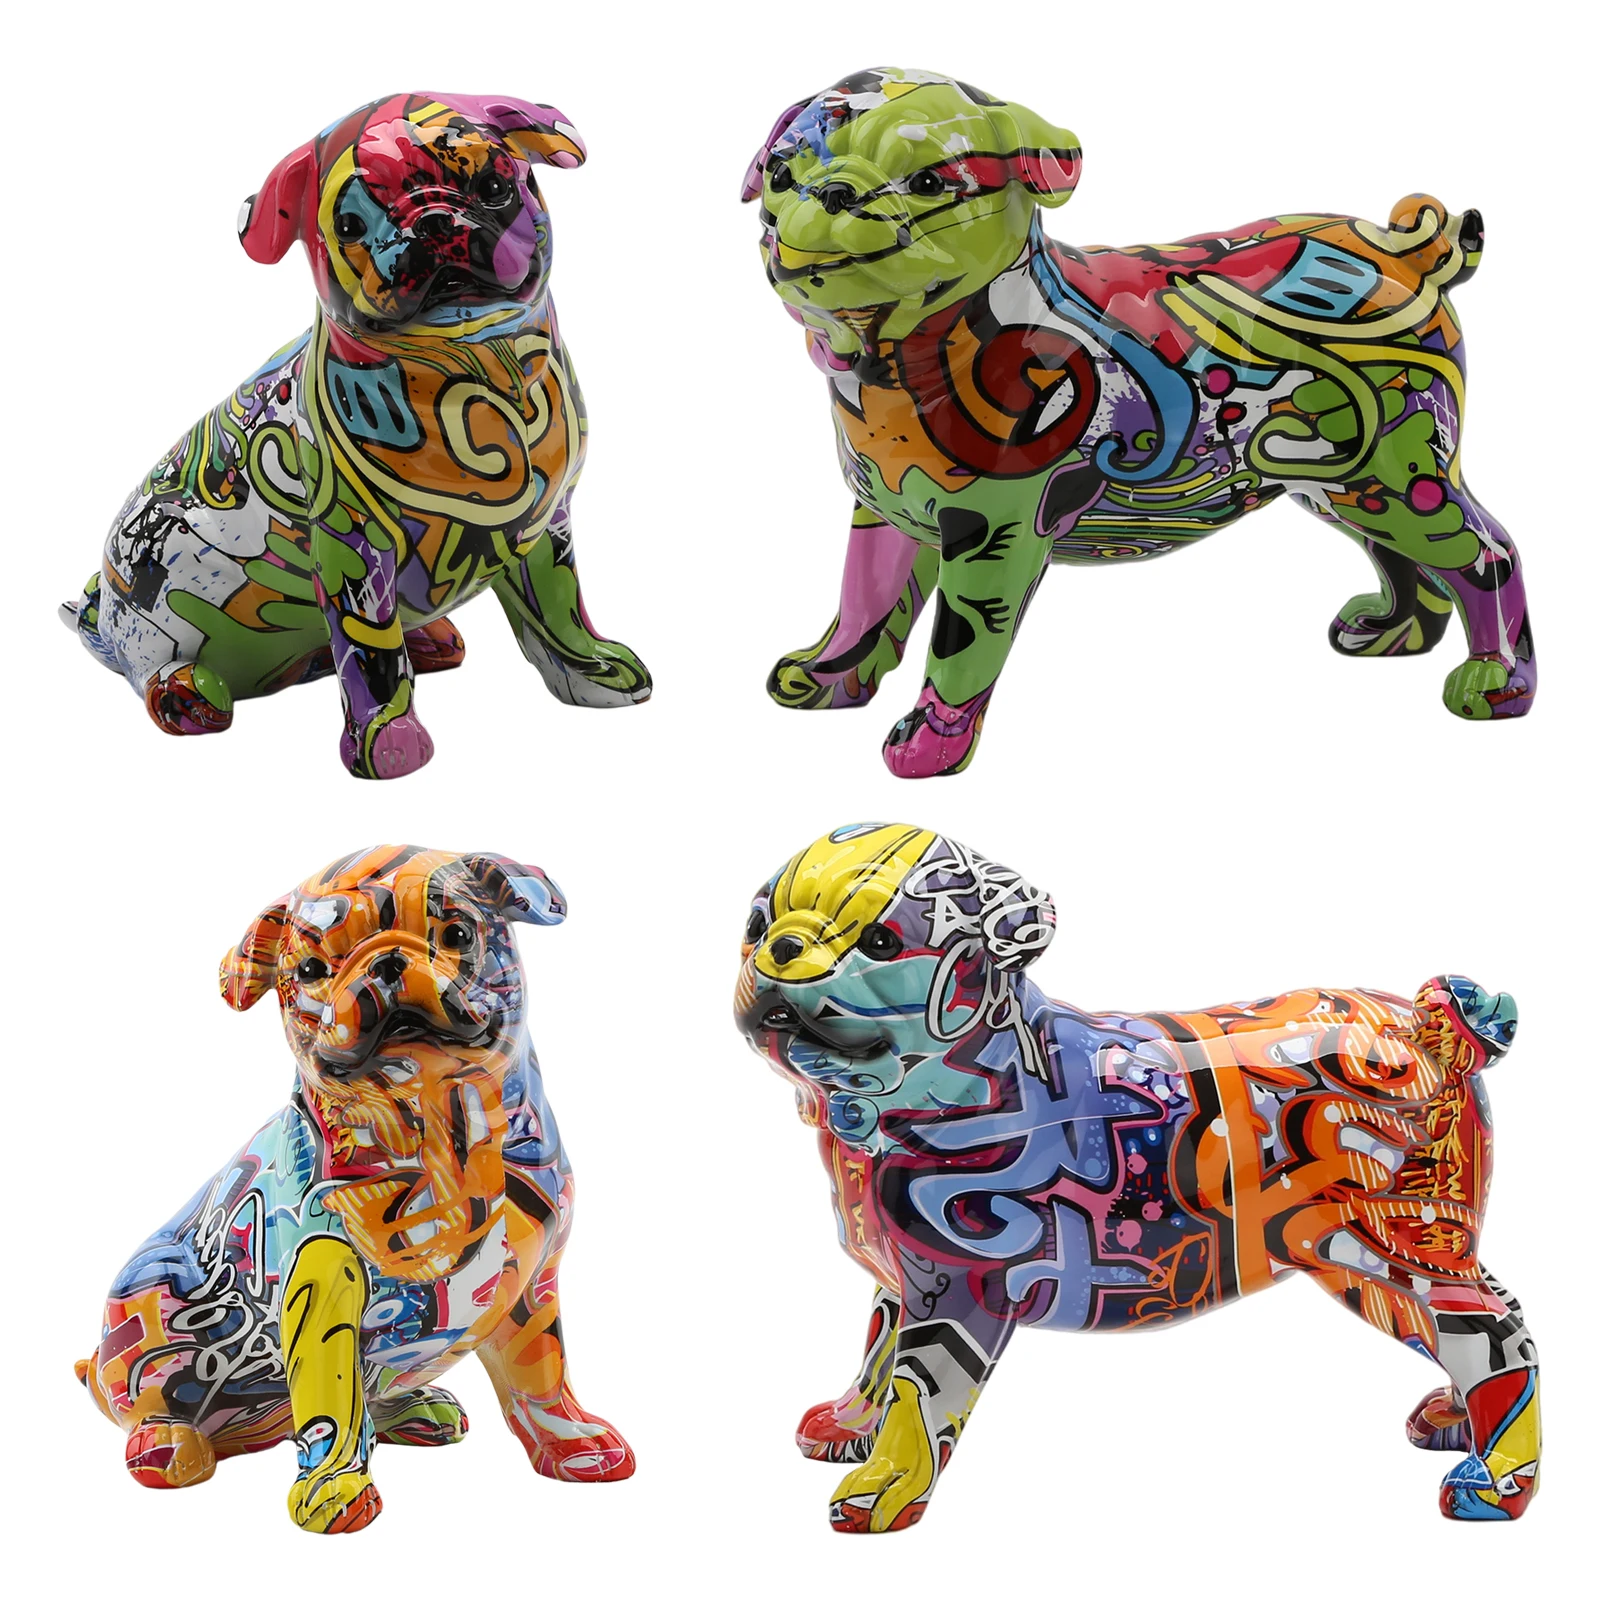 Nordic Painting Graffiti French   Creative Resin Crafts Animal Dog Figurines Sculpture Home Wine Cabinet Office Decor